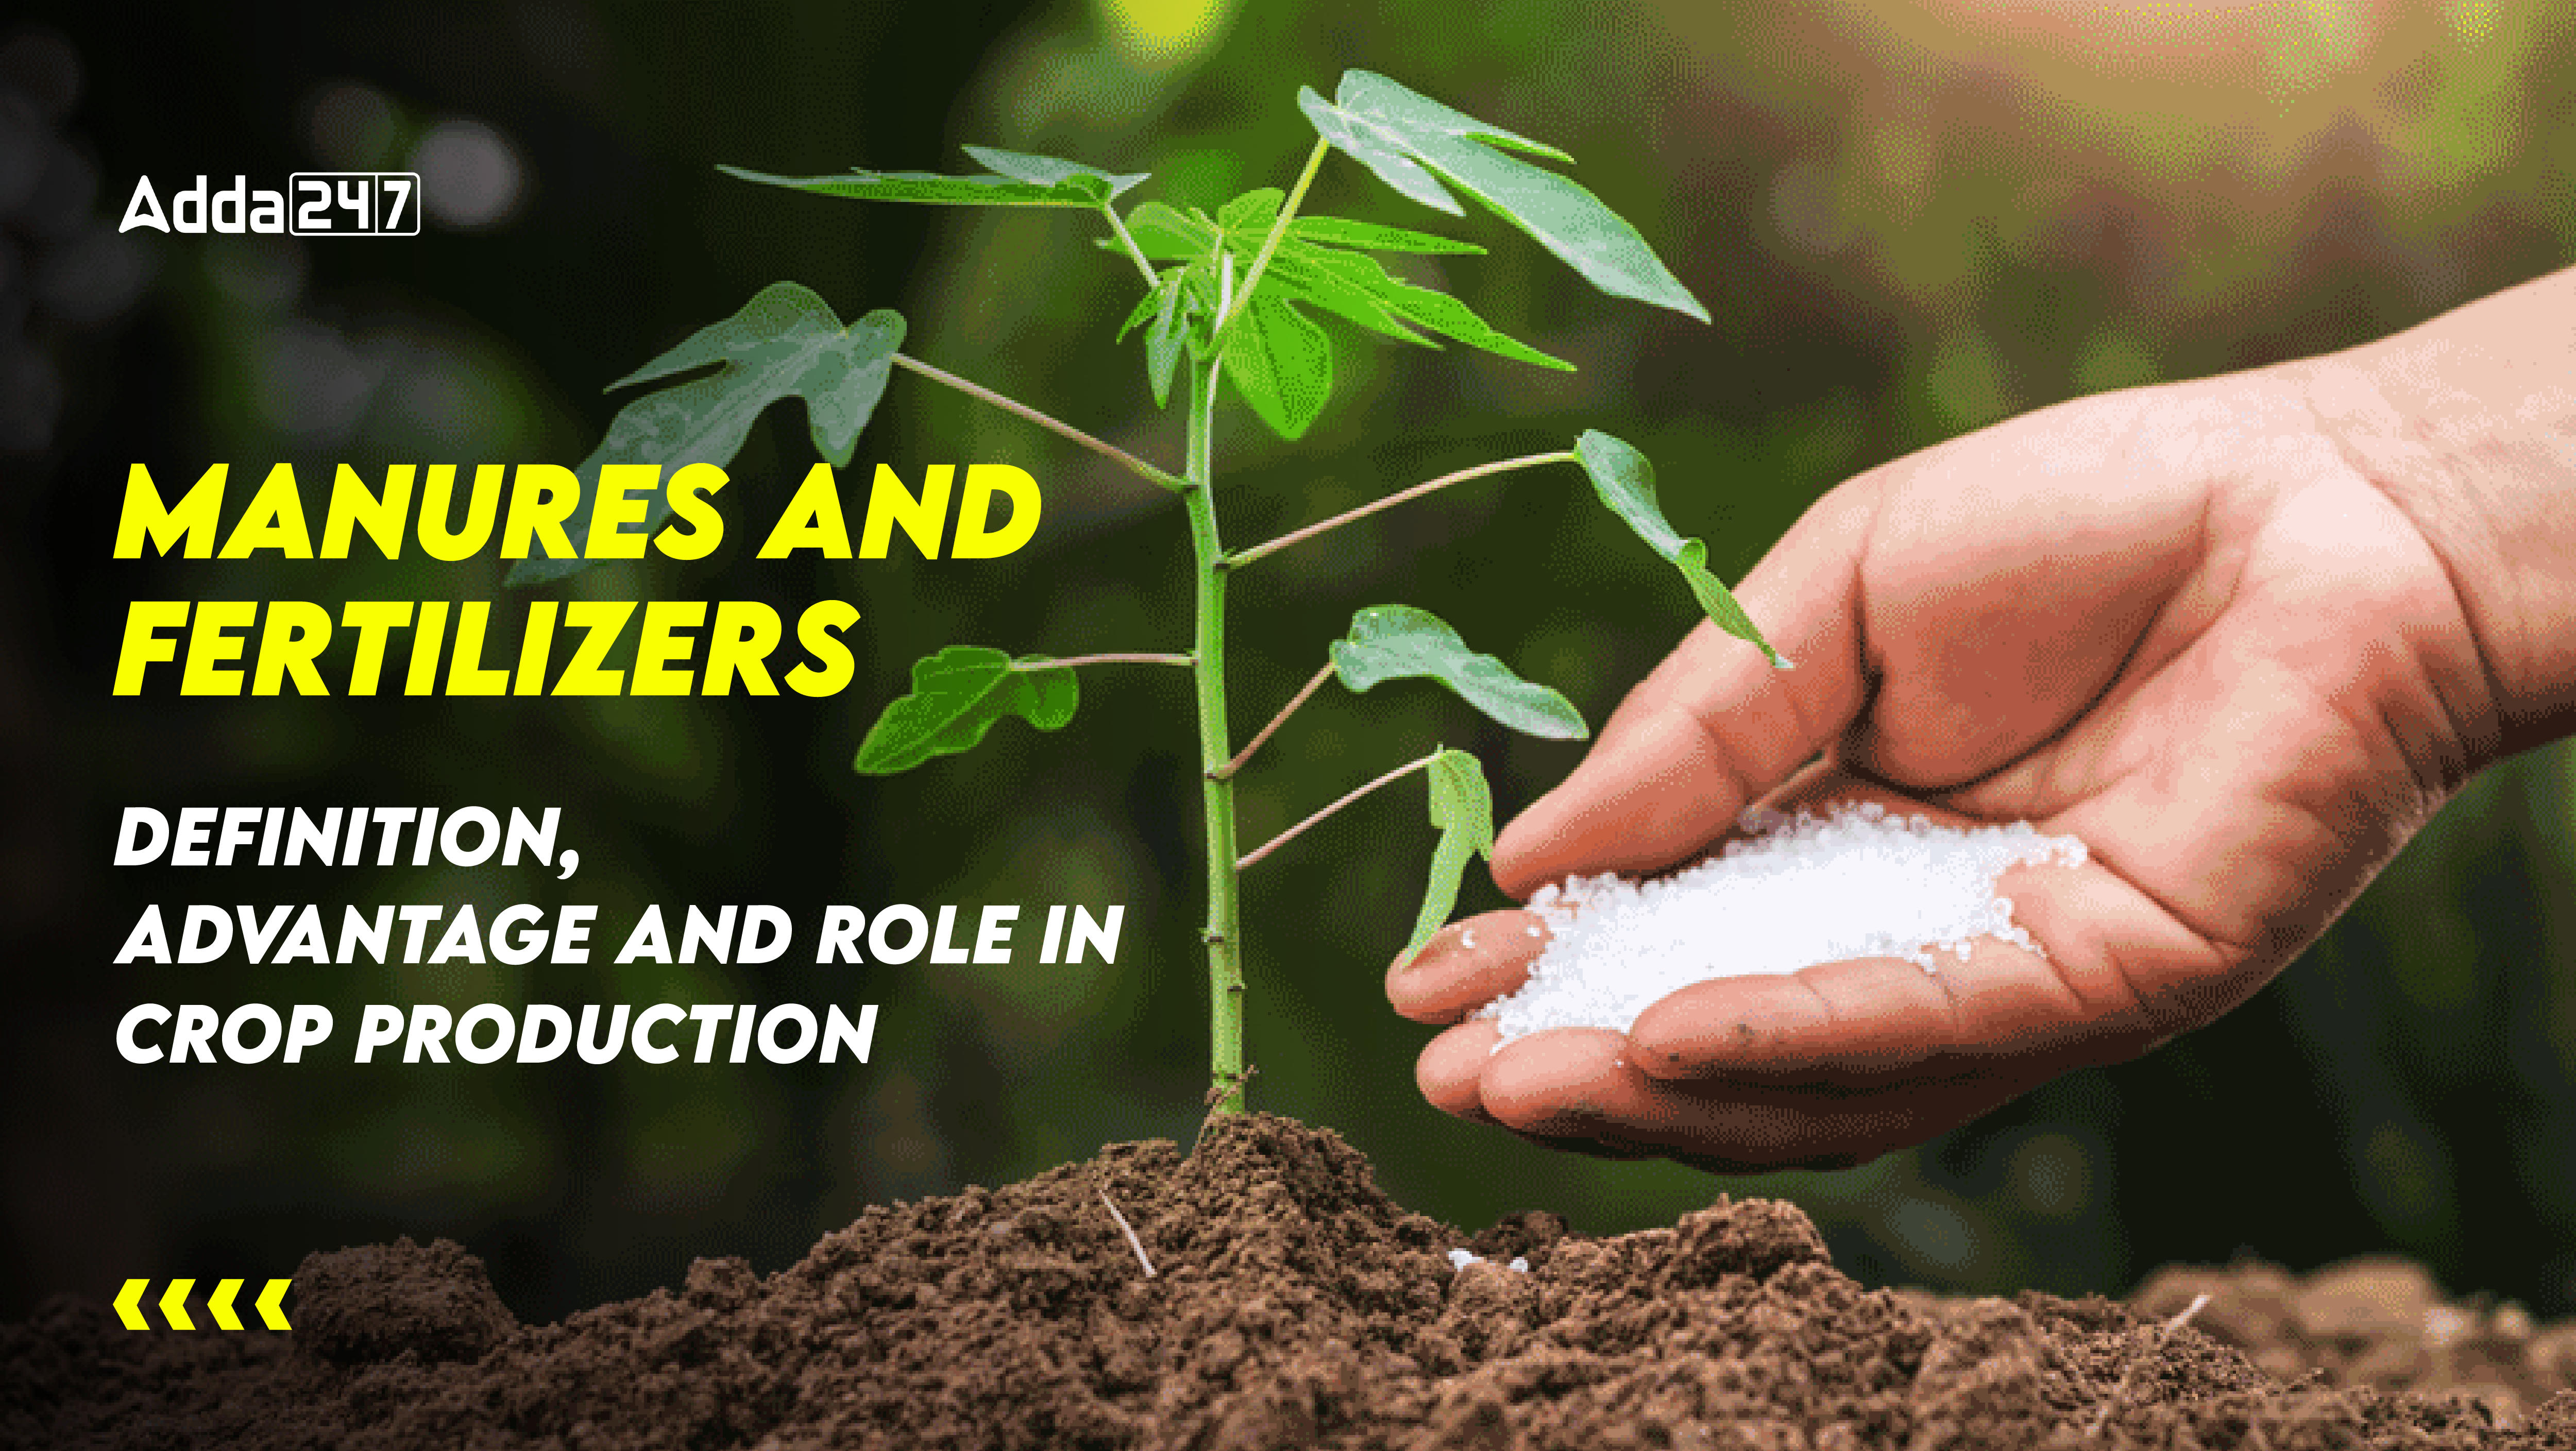 Manures and Fertilizers: Definition, Advantage and Role in Crop Production